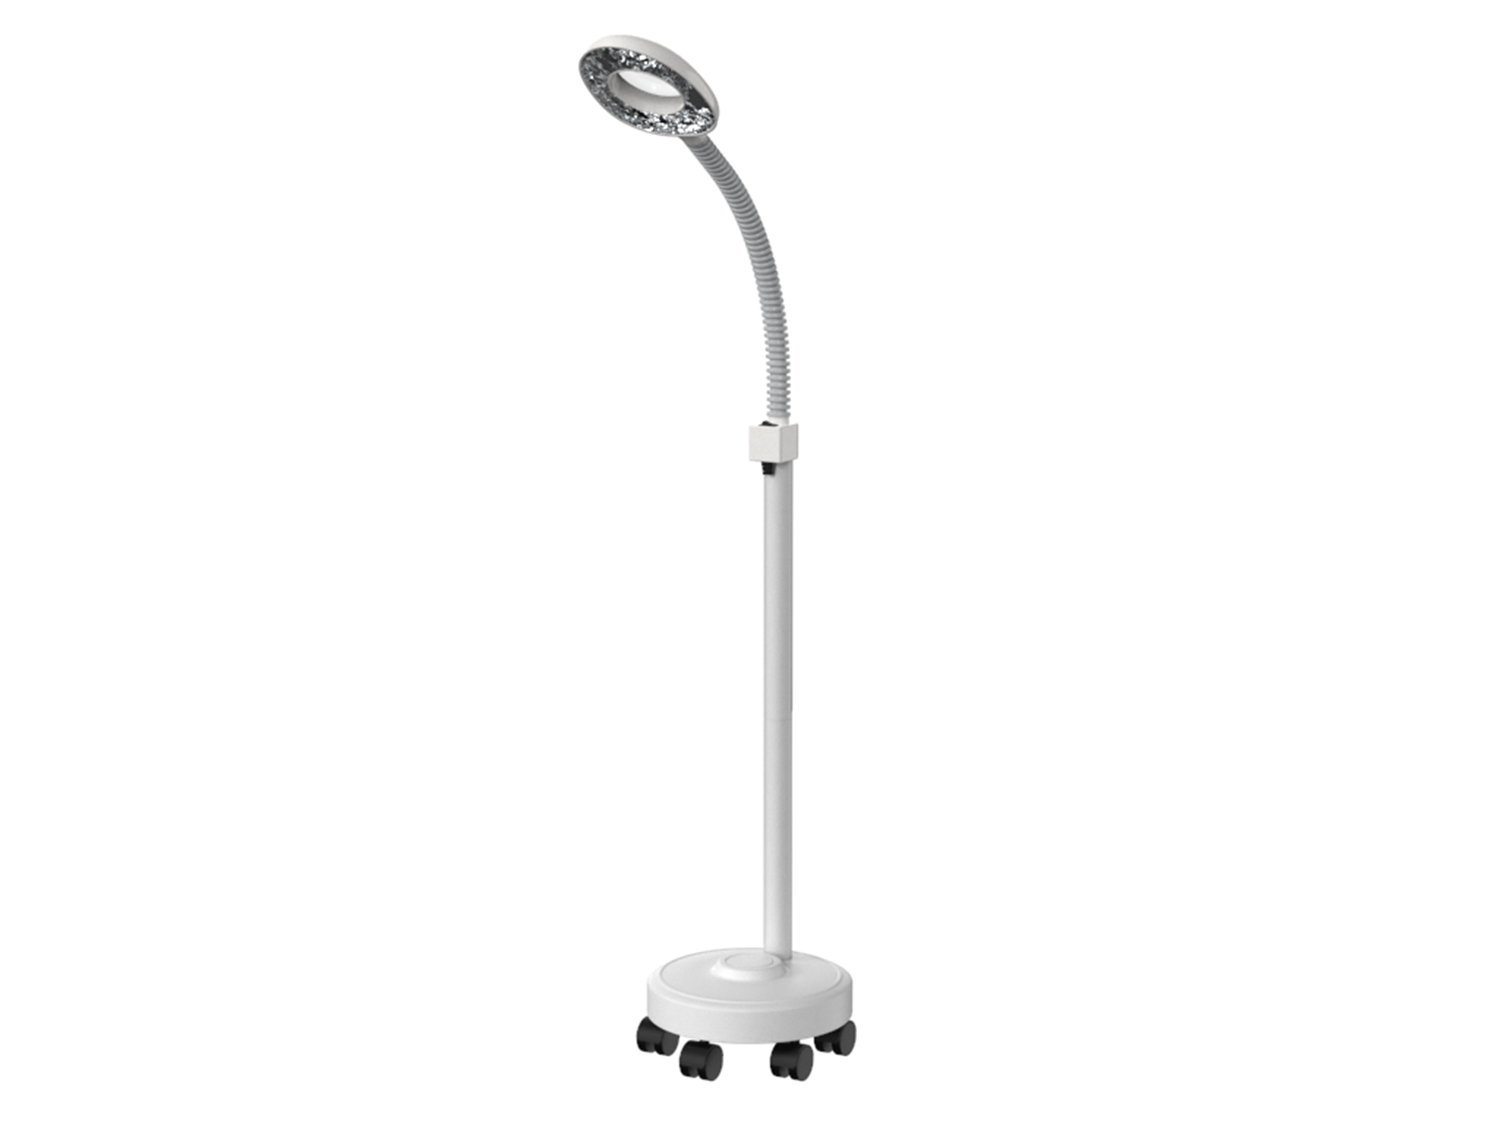 Pro 16X Diopter LED Magnifying Floor Stand Lamp Magnifier Glass Len Facial  Light For Beauty Salon Nail Tattoo 110V/220V – the best products in the  Joom Geek online store